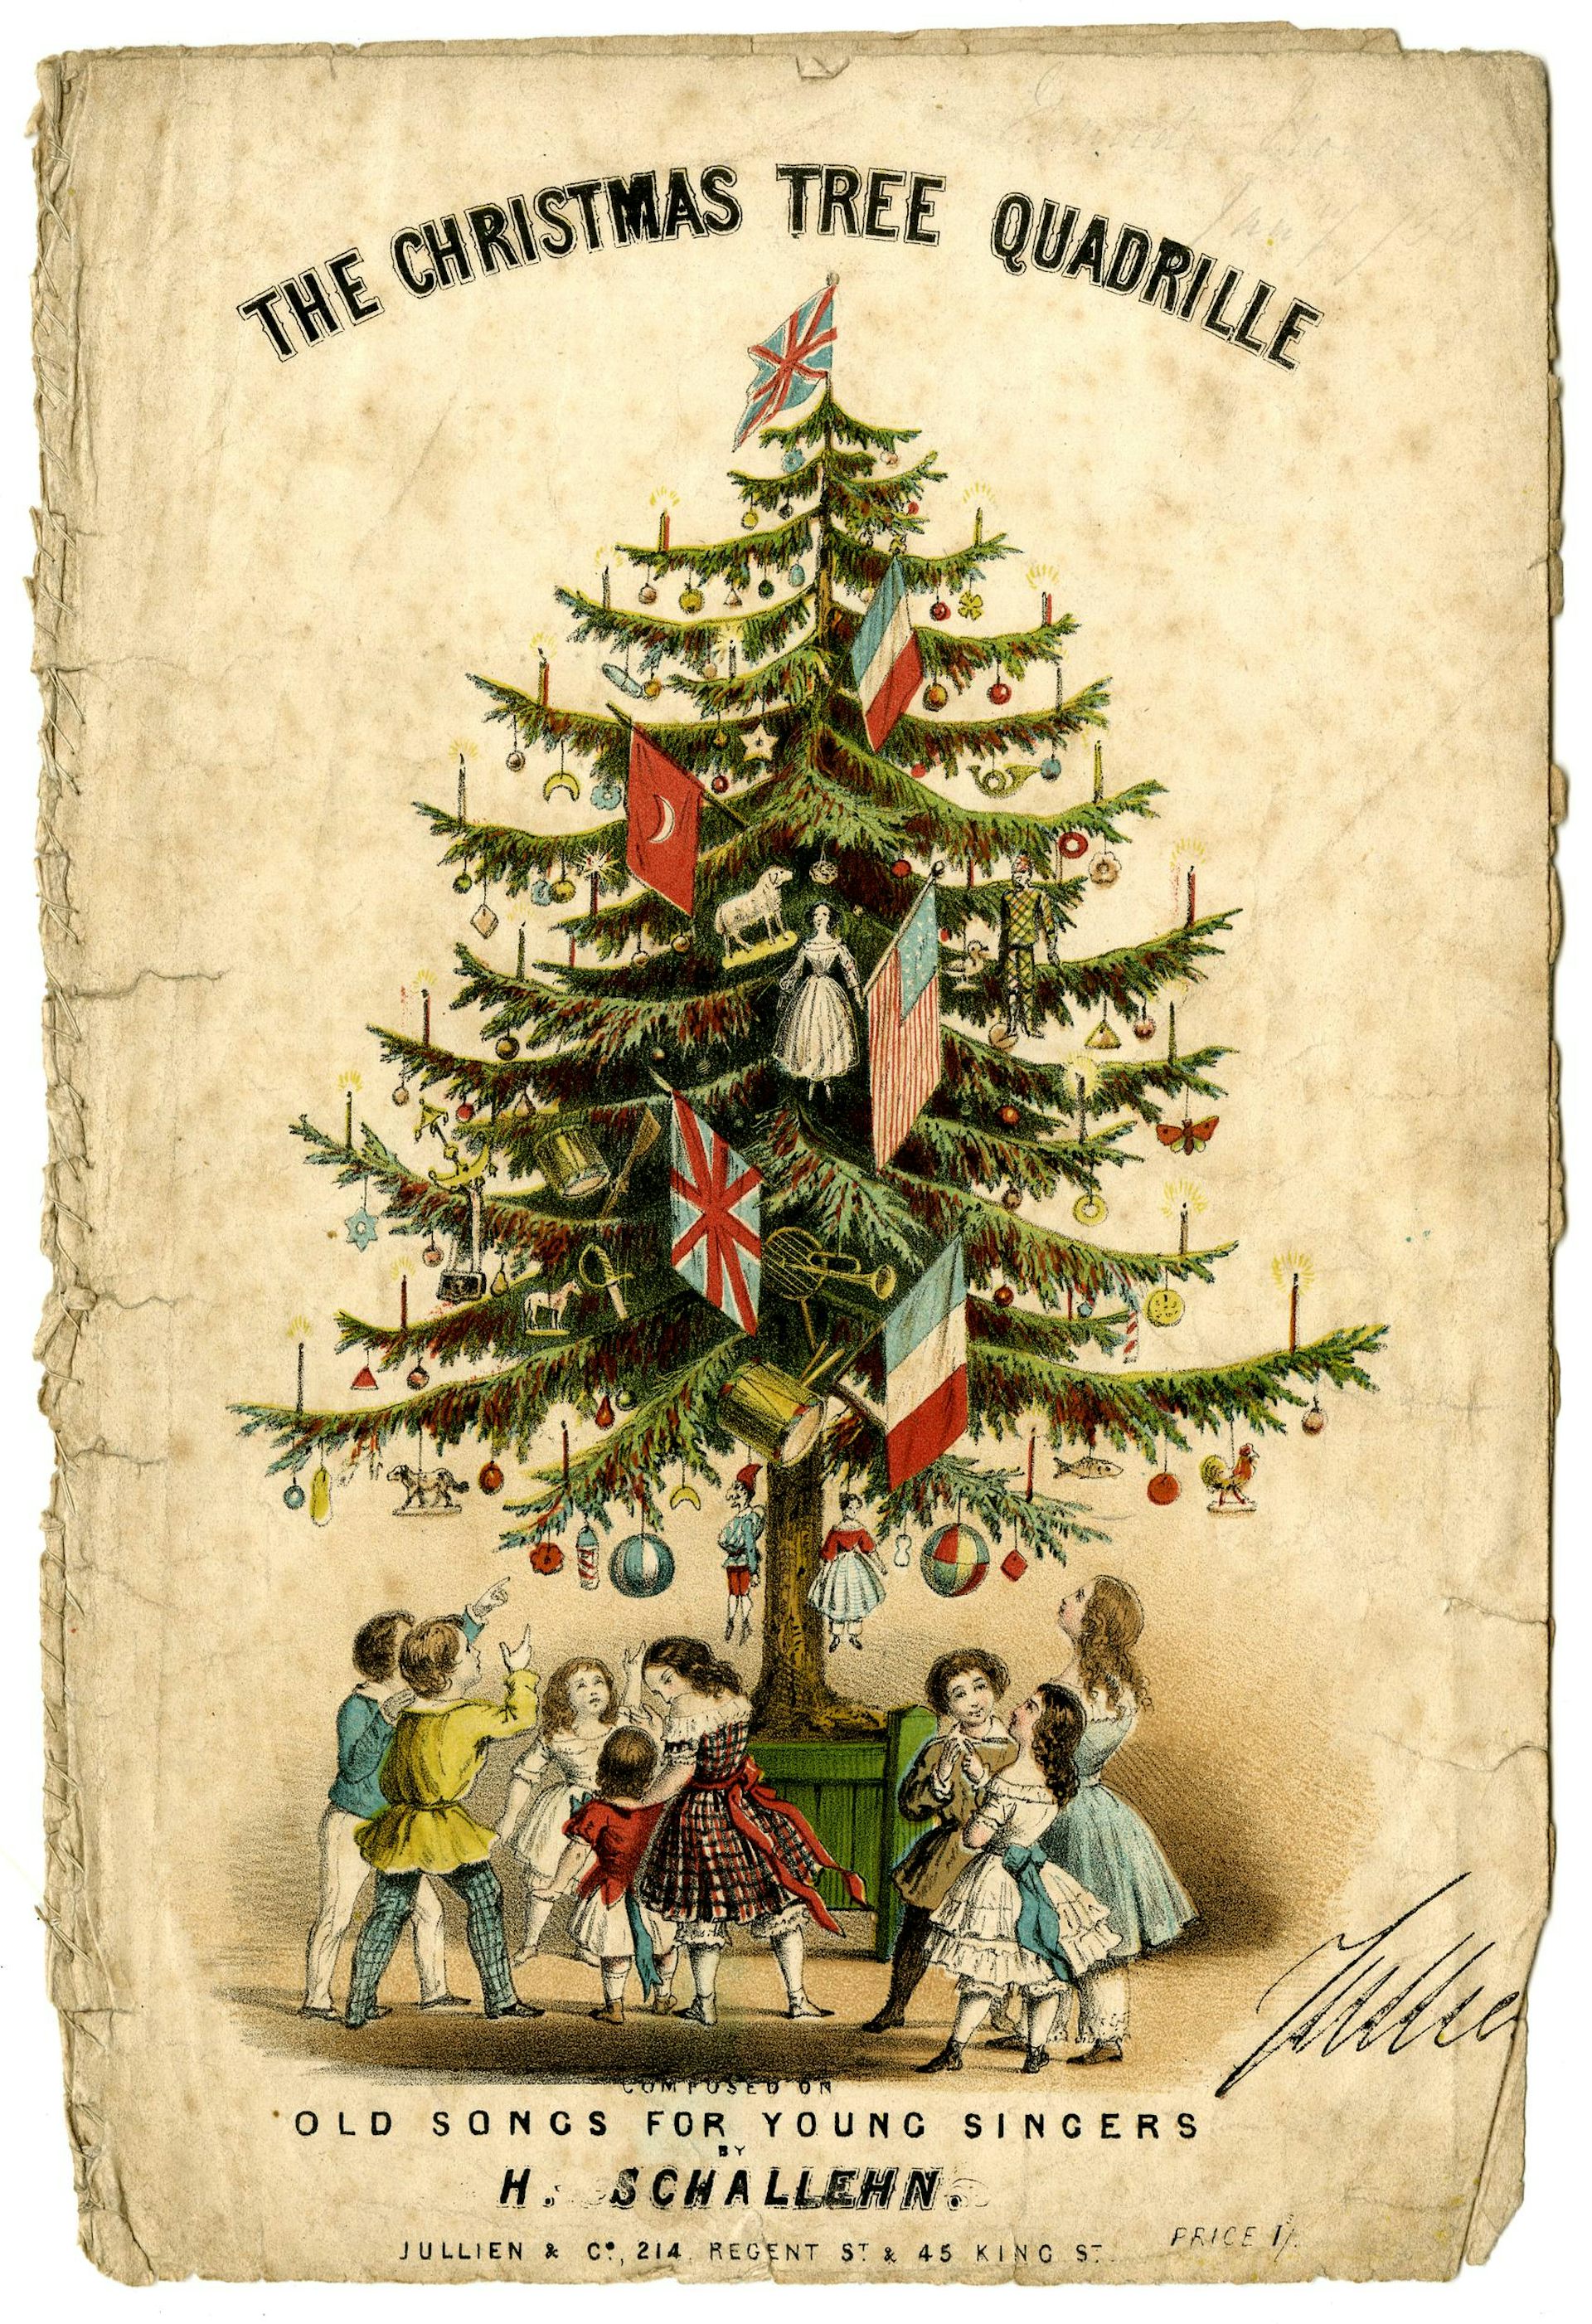 A story of legends, families and capitalism: a candid history of the Christmas tree